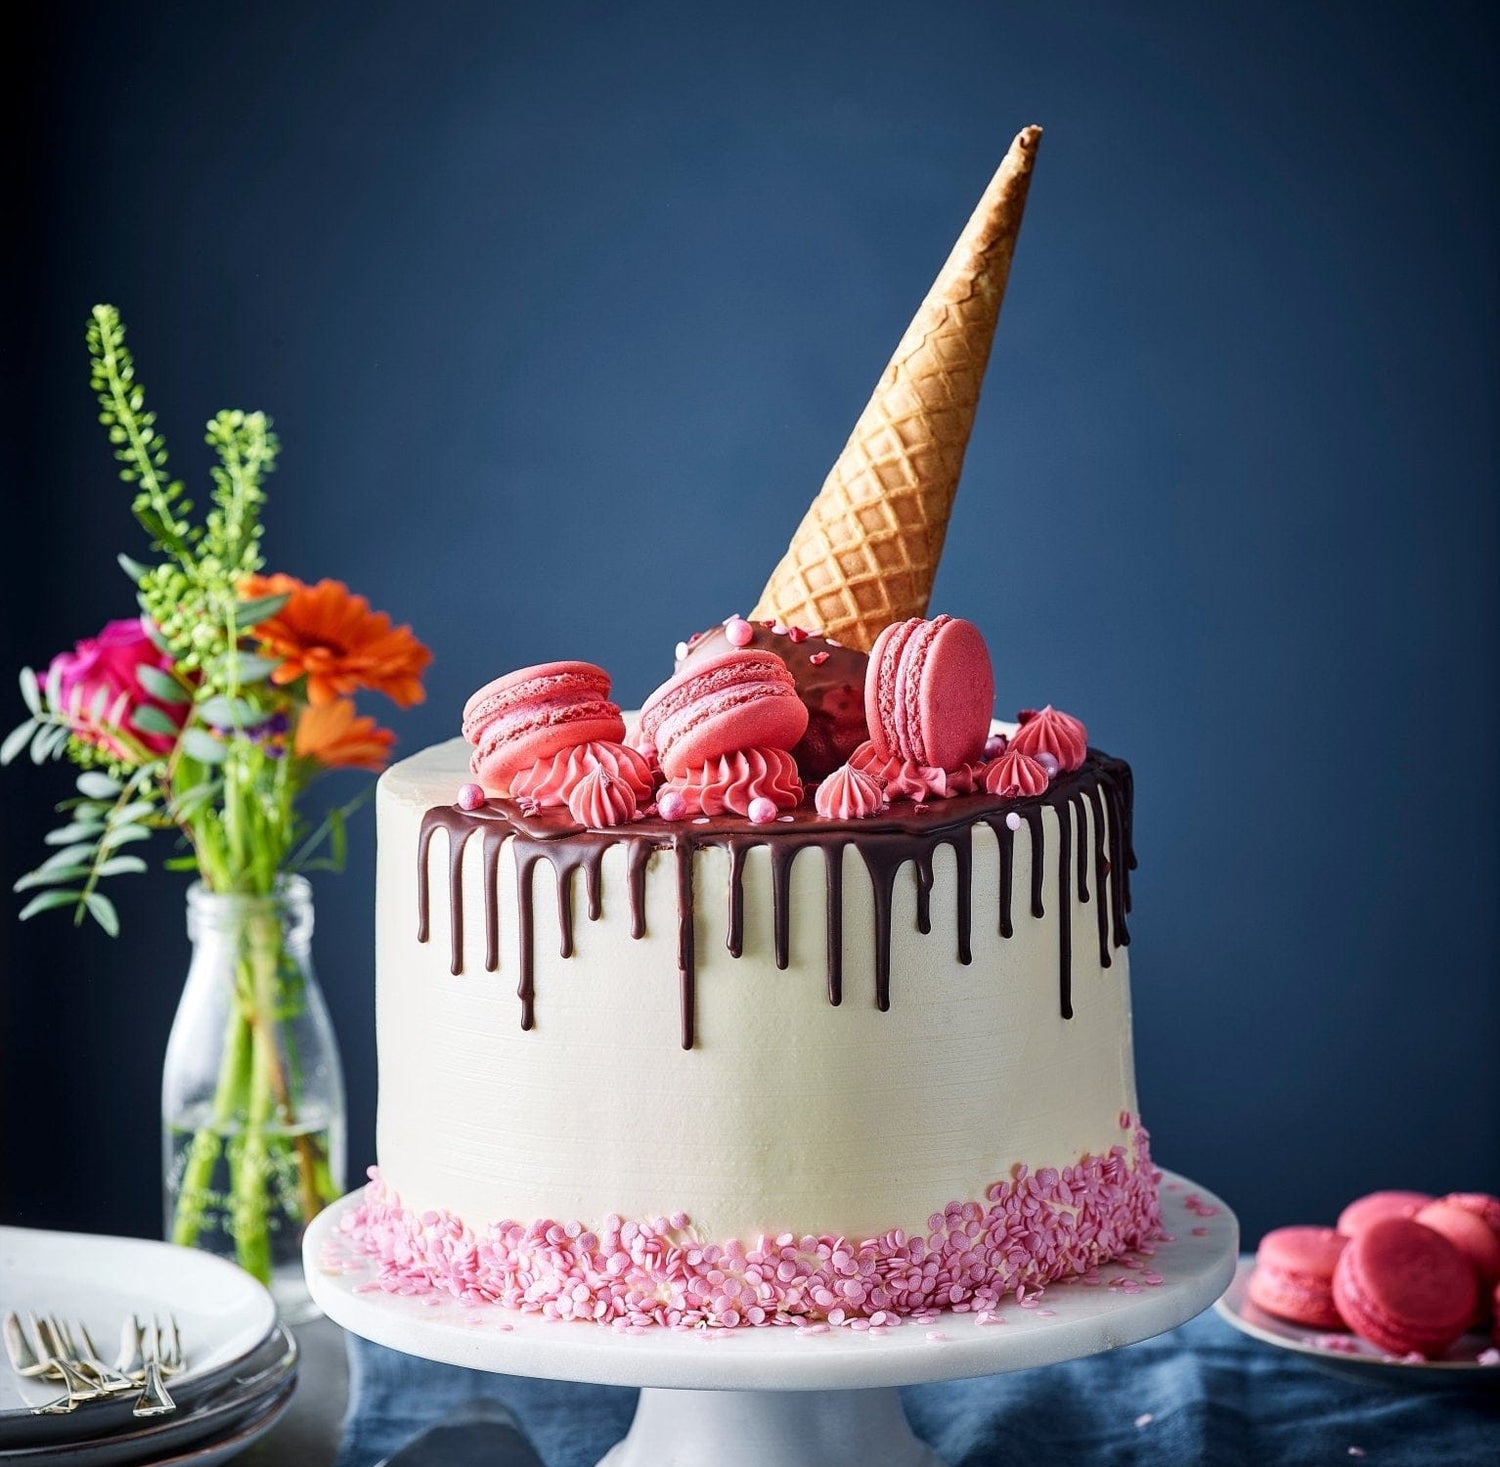 Lovingly Handmade Cakes & Gateaux - UK Home Delivery â€“ Patisserie Valerie